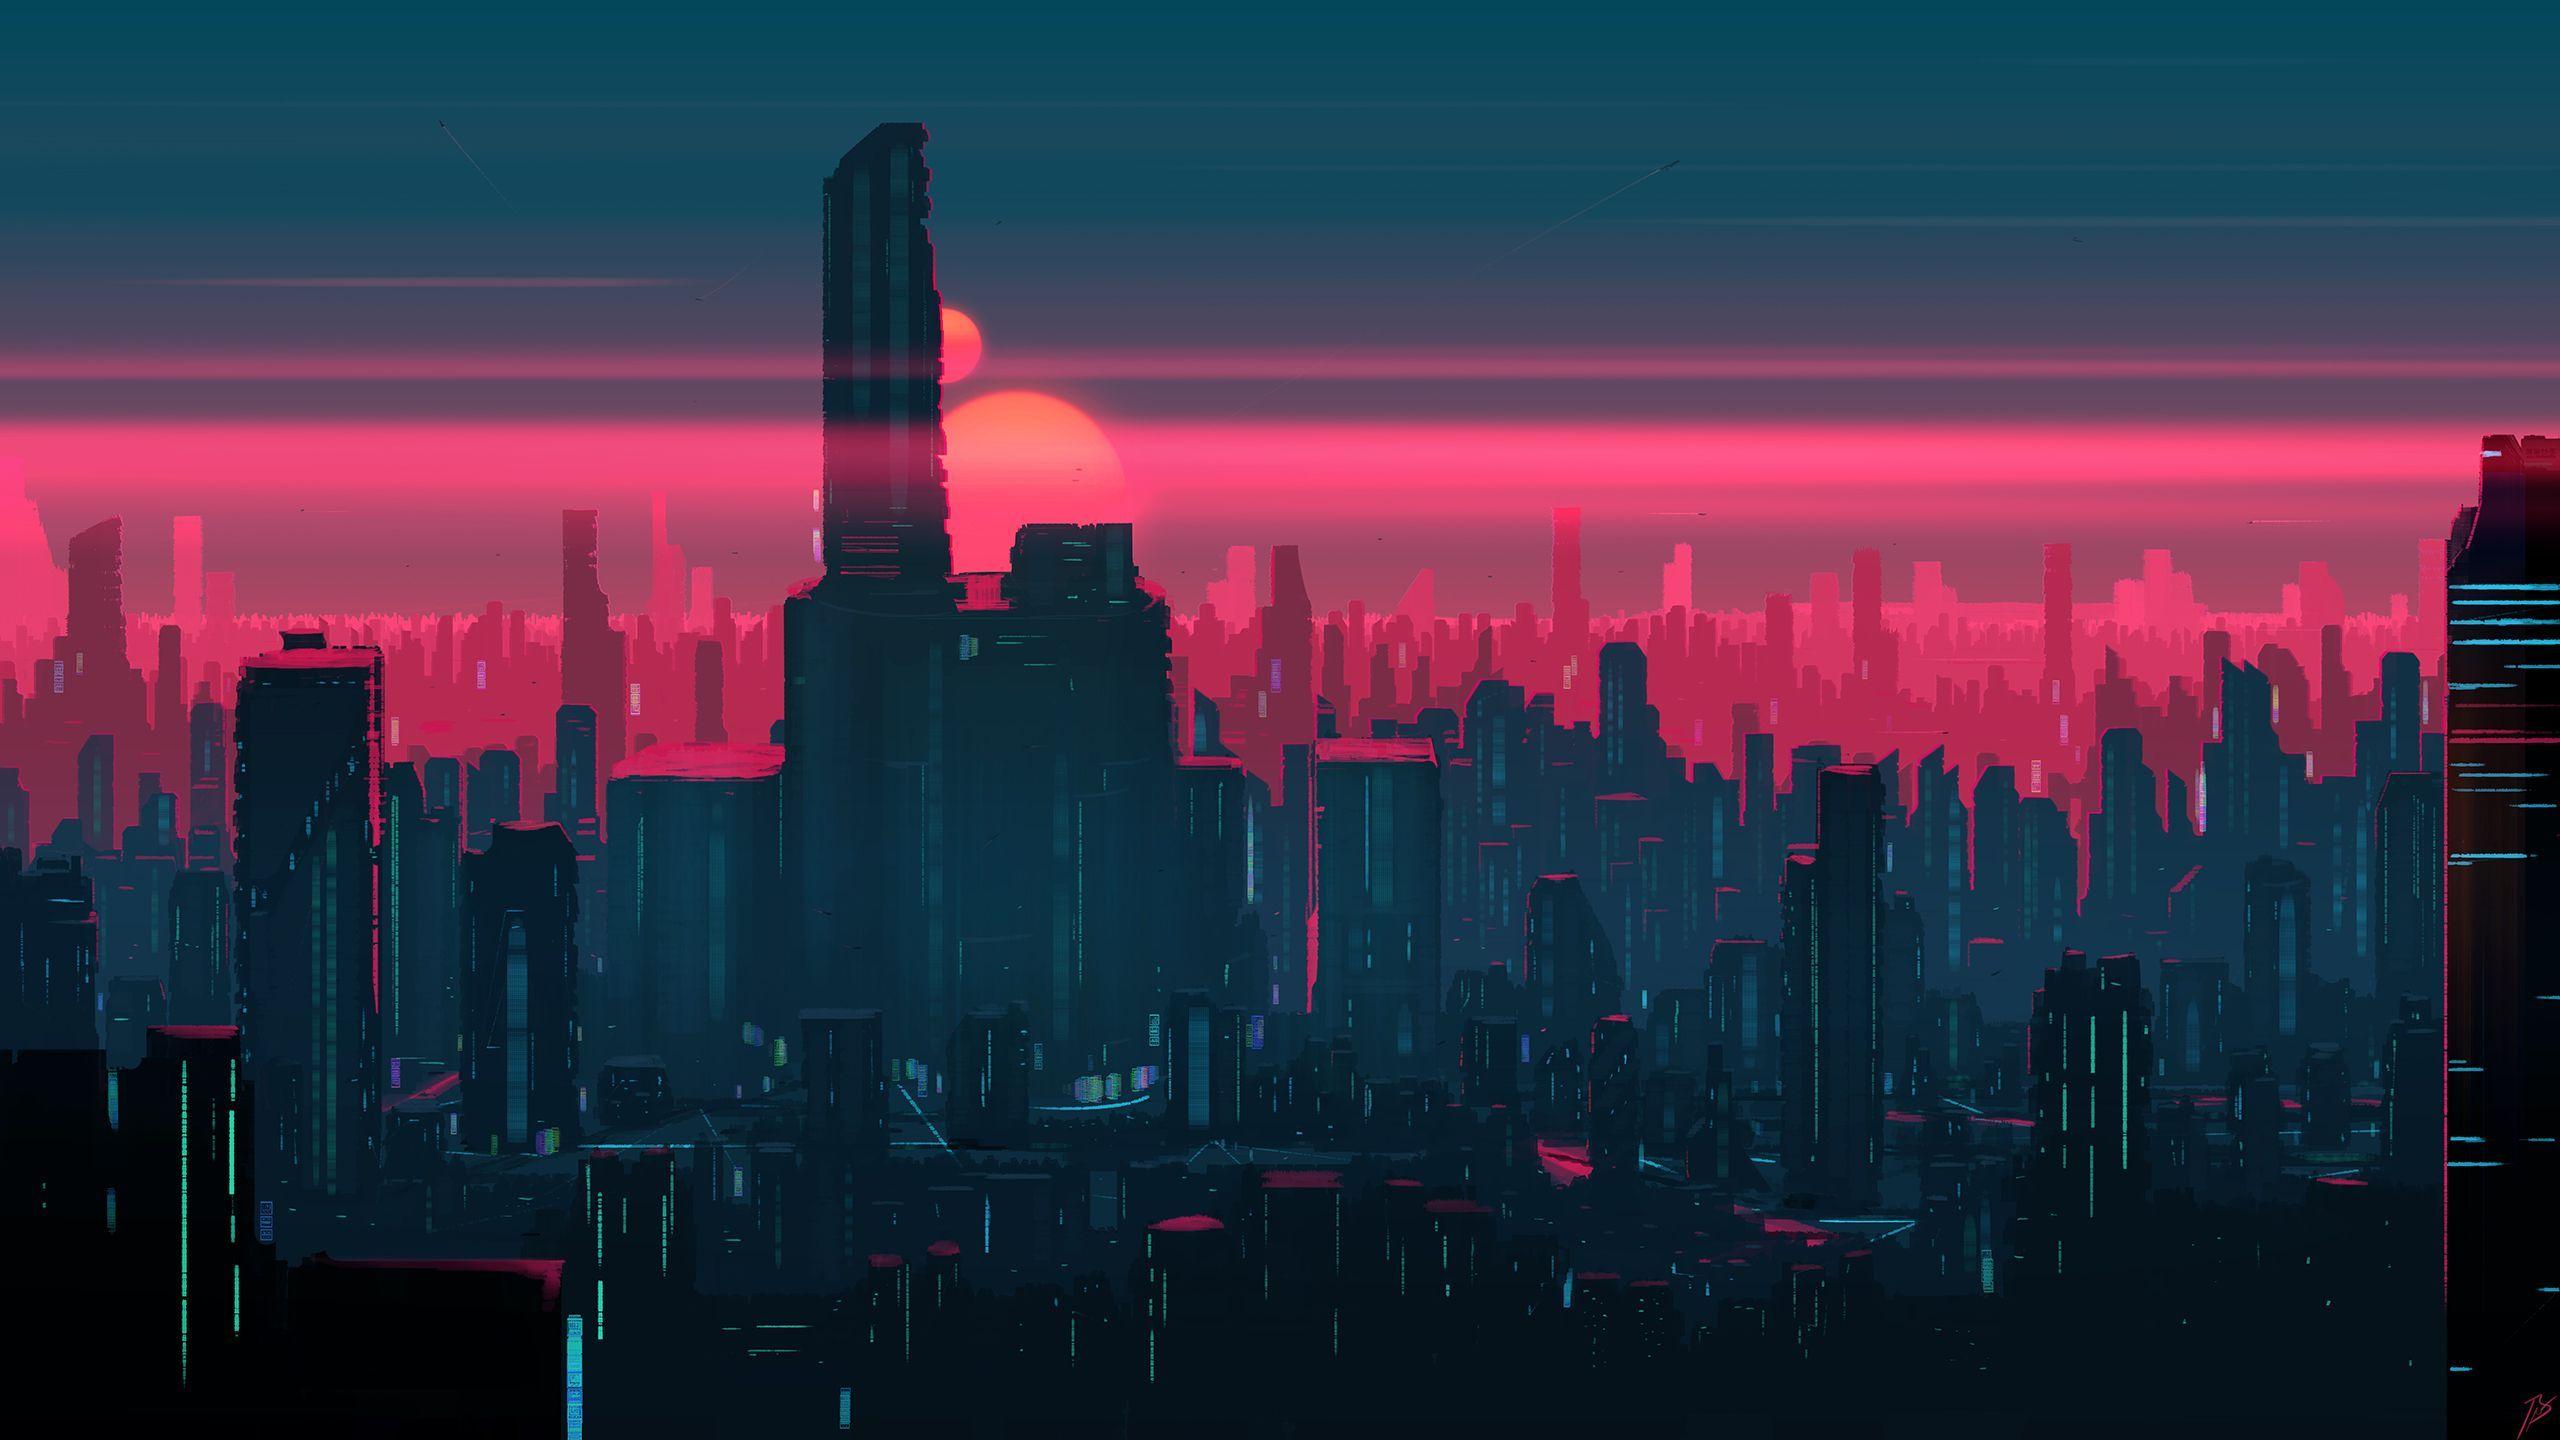 Aesthetic Vaporwave City Wallpapers Top Free Aesthetic Vaporwave City Backgrounds Wallpaperaccess